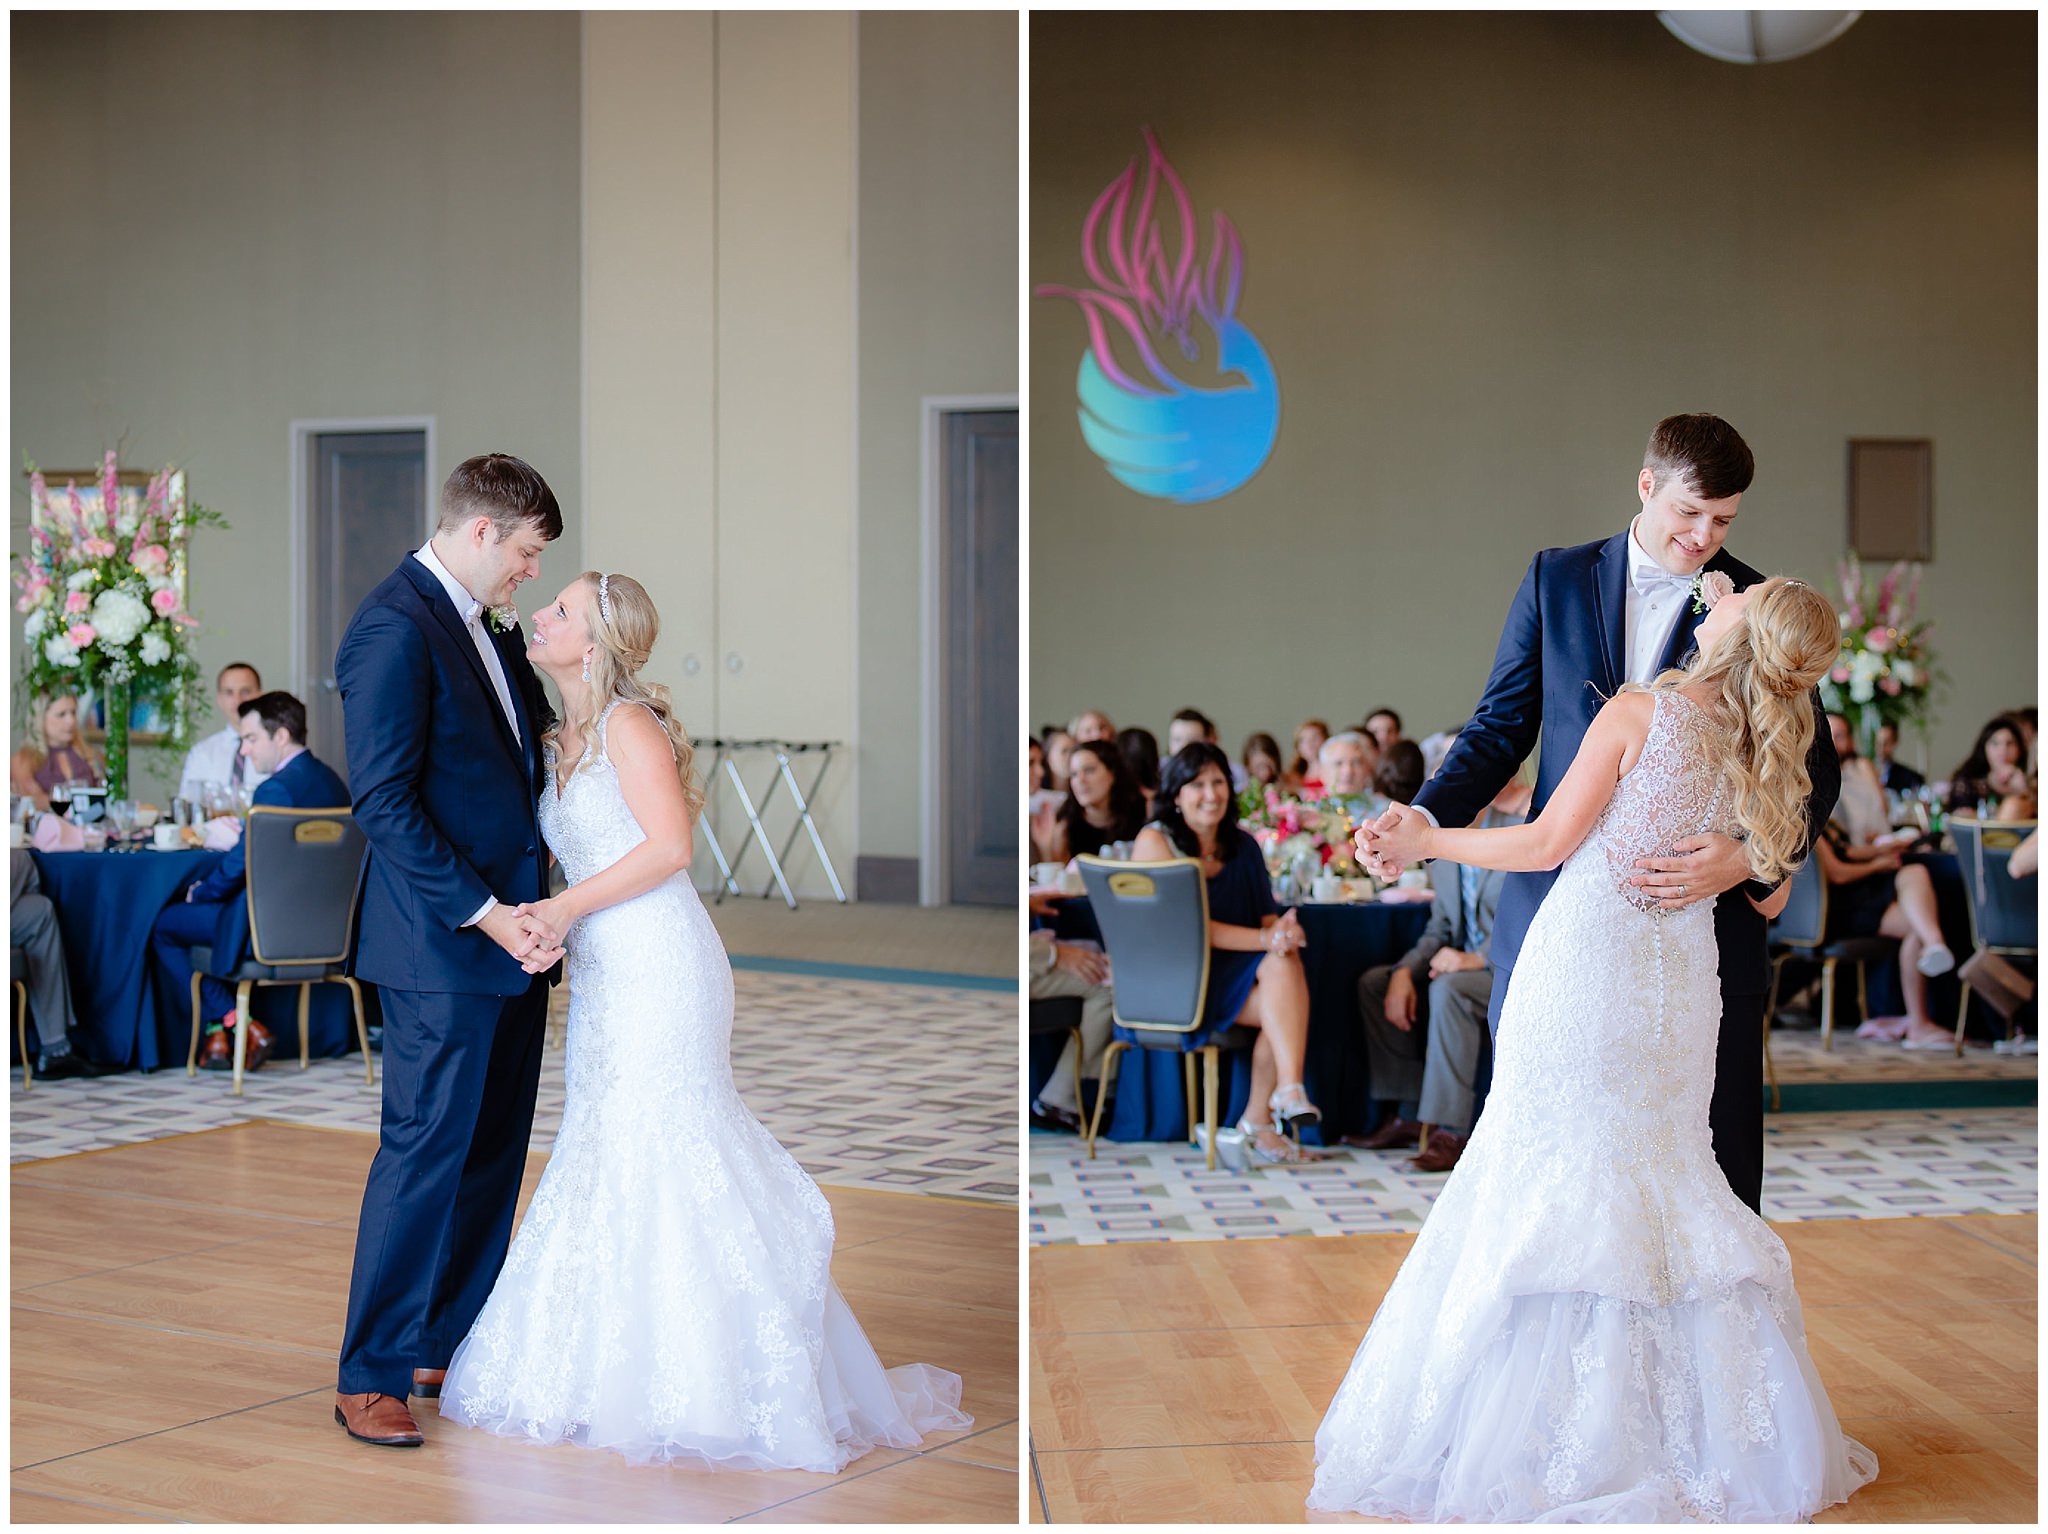 Newlyweds' first dance at Duquesne University